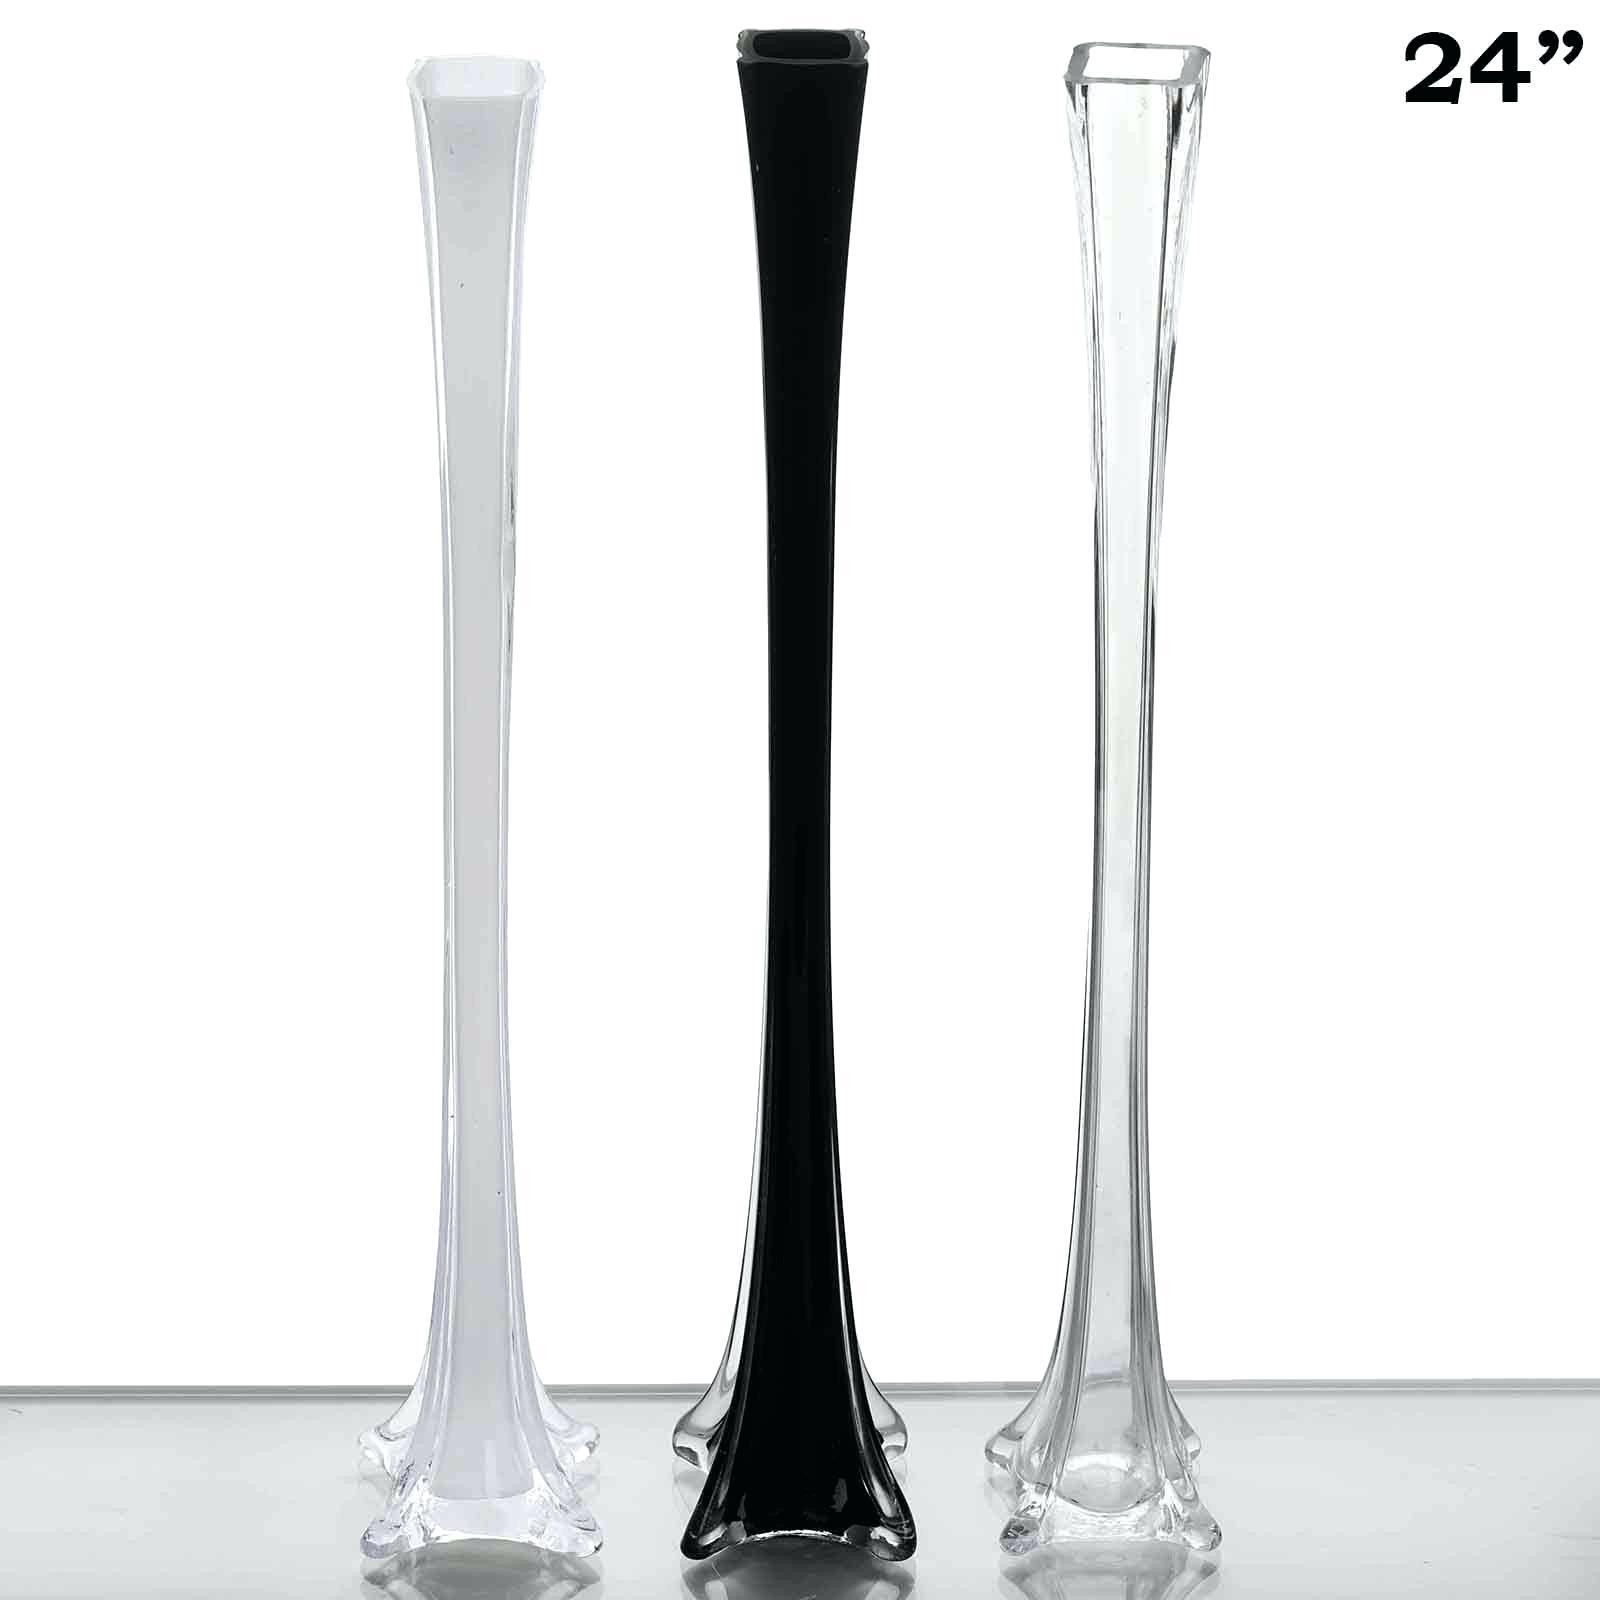 23 Awesome 4 Inch Glass Vase 2024 free download 4 inch glass vase of fantastic chair decor ideas from living room vases wholesale awesome regarding fantastic chair decor ideas from living room vases wholesale awesome cheap glass vases 1h 